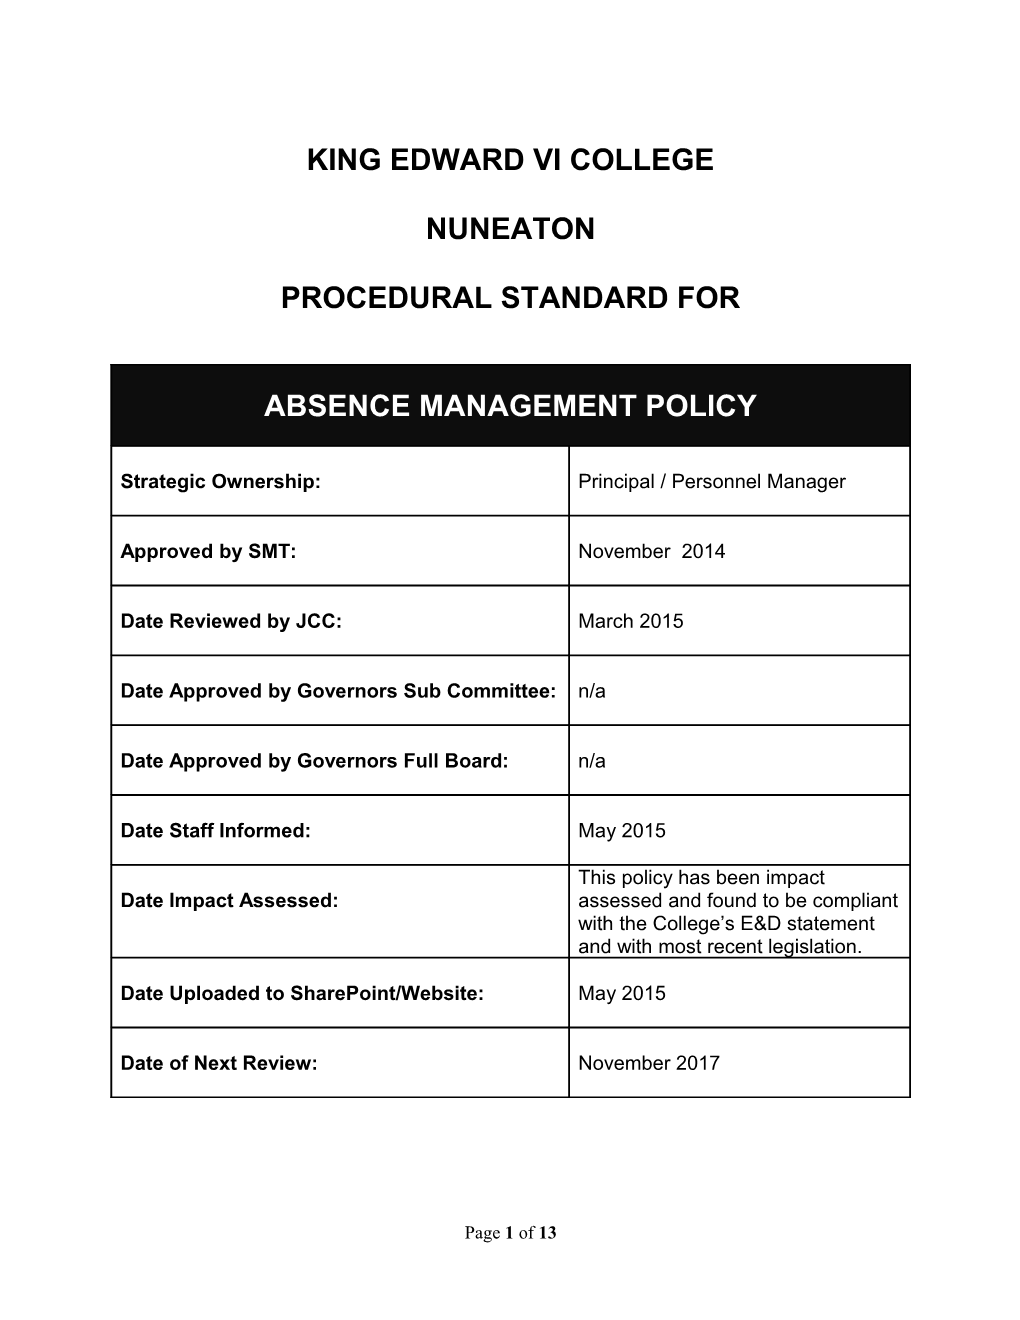 Absence Management Policy